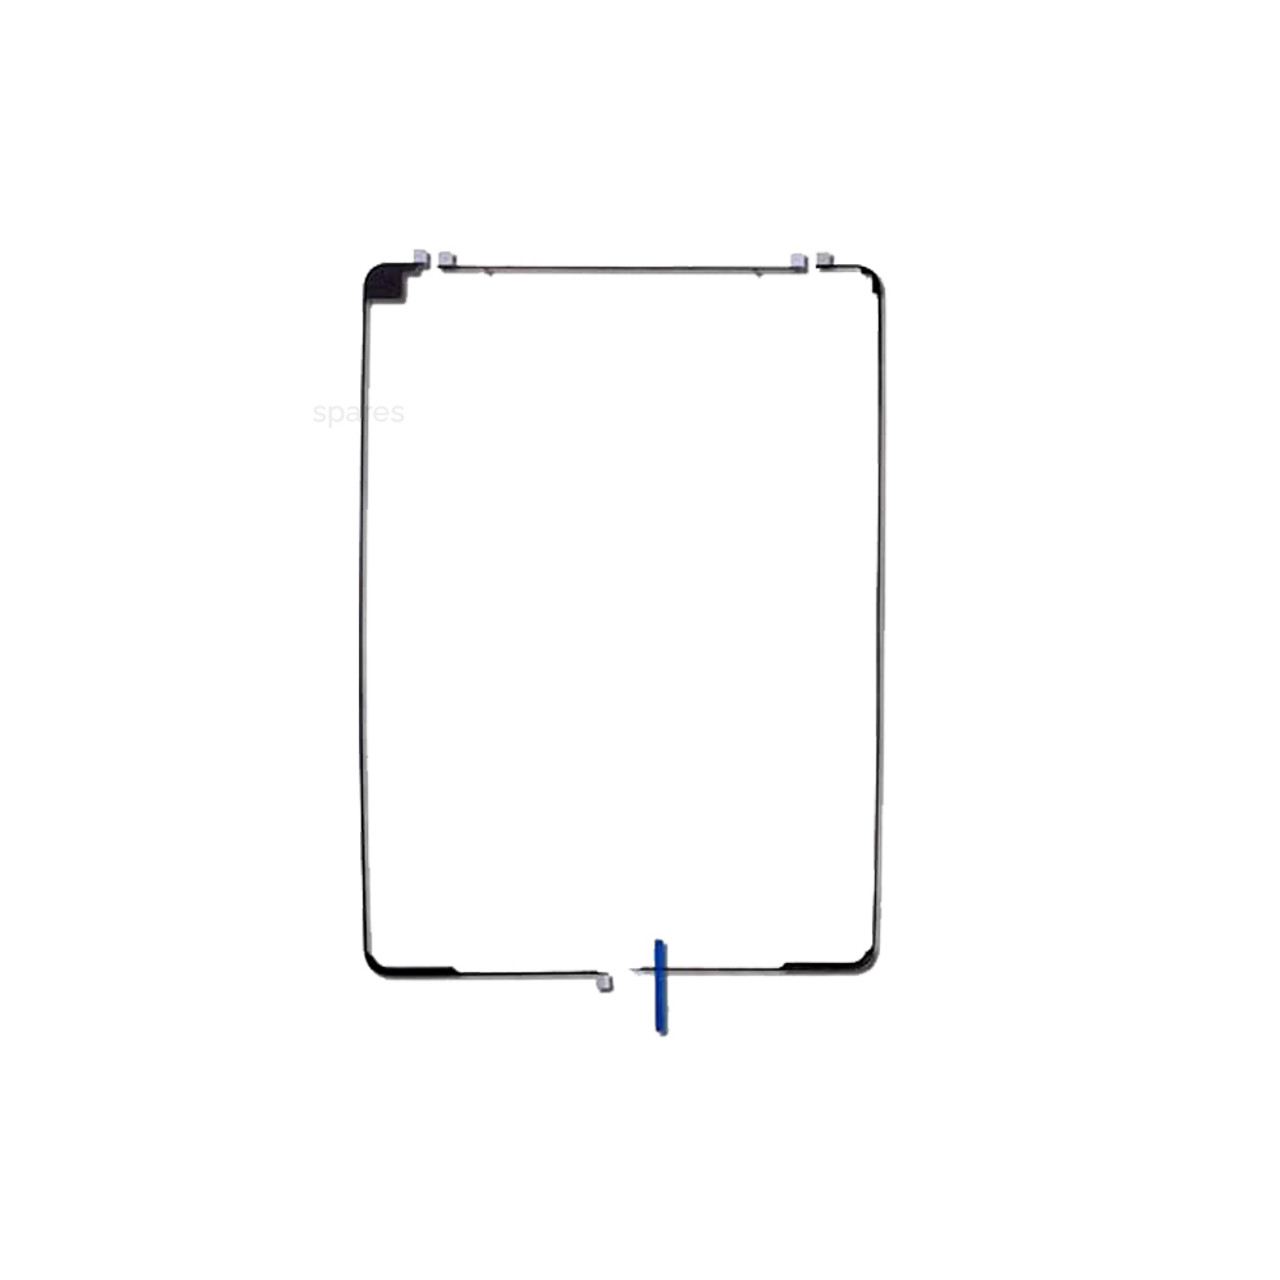 iPad Pro 10.5-inch - LCD Adhesive Replacement